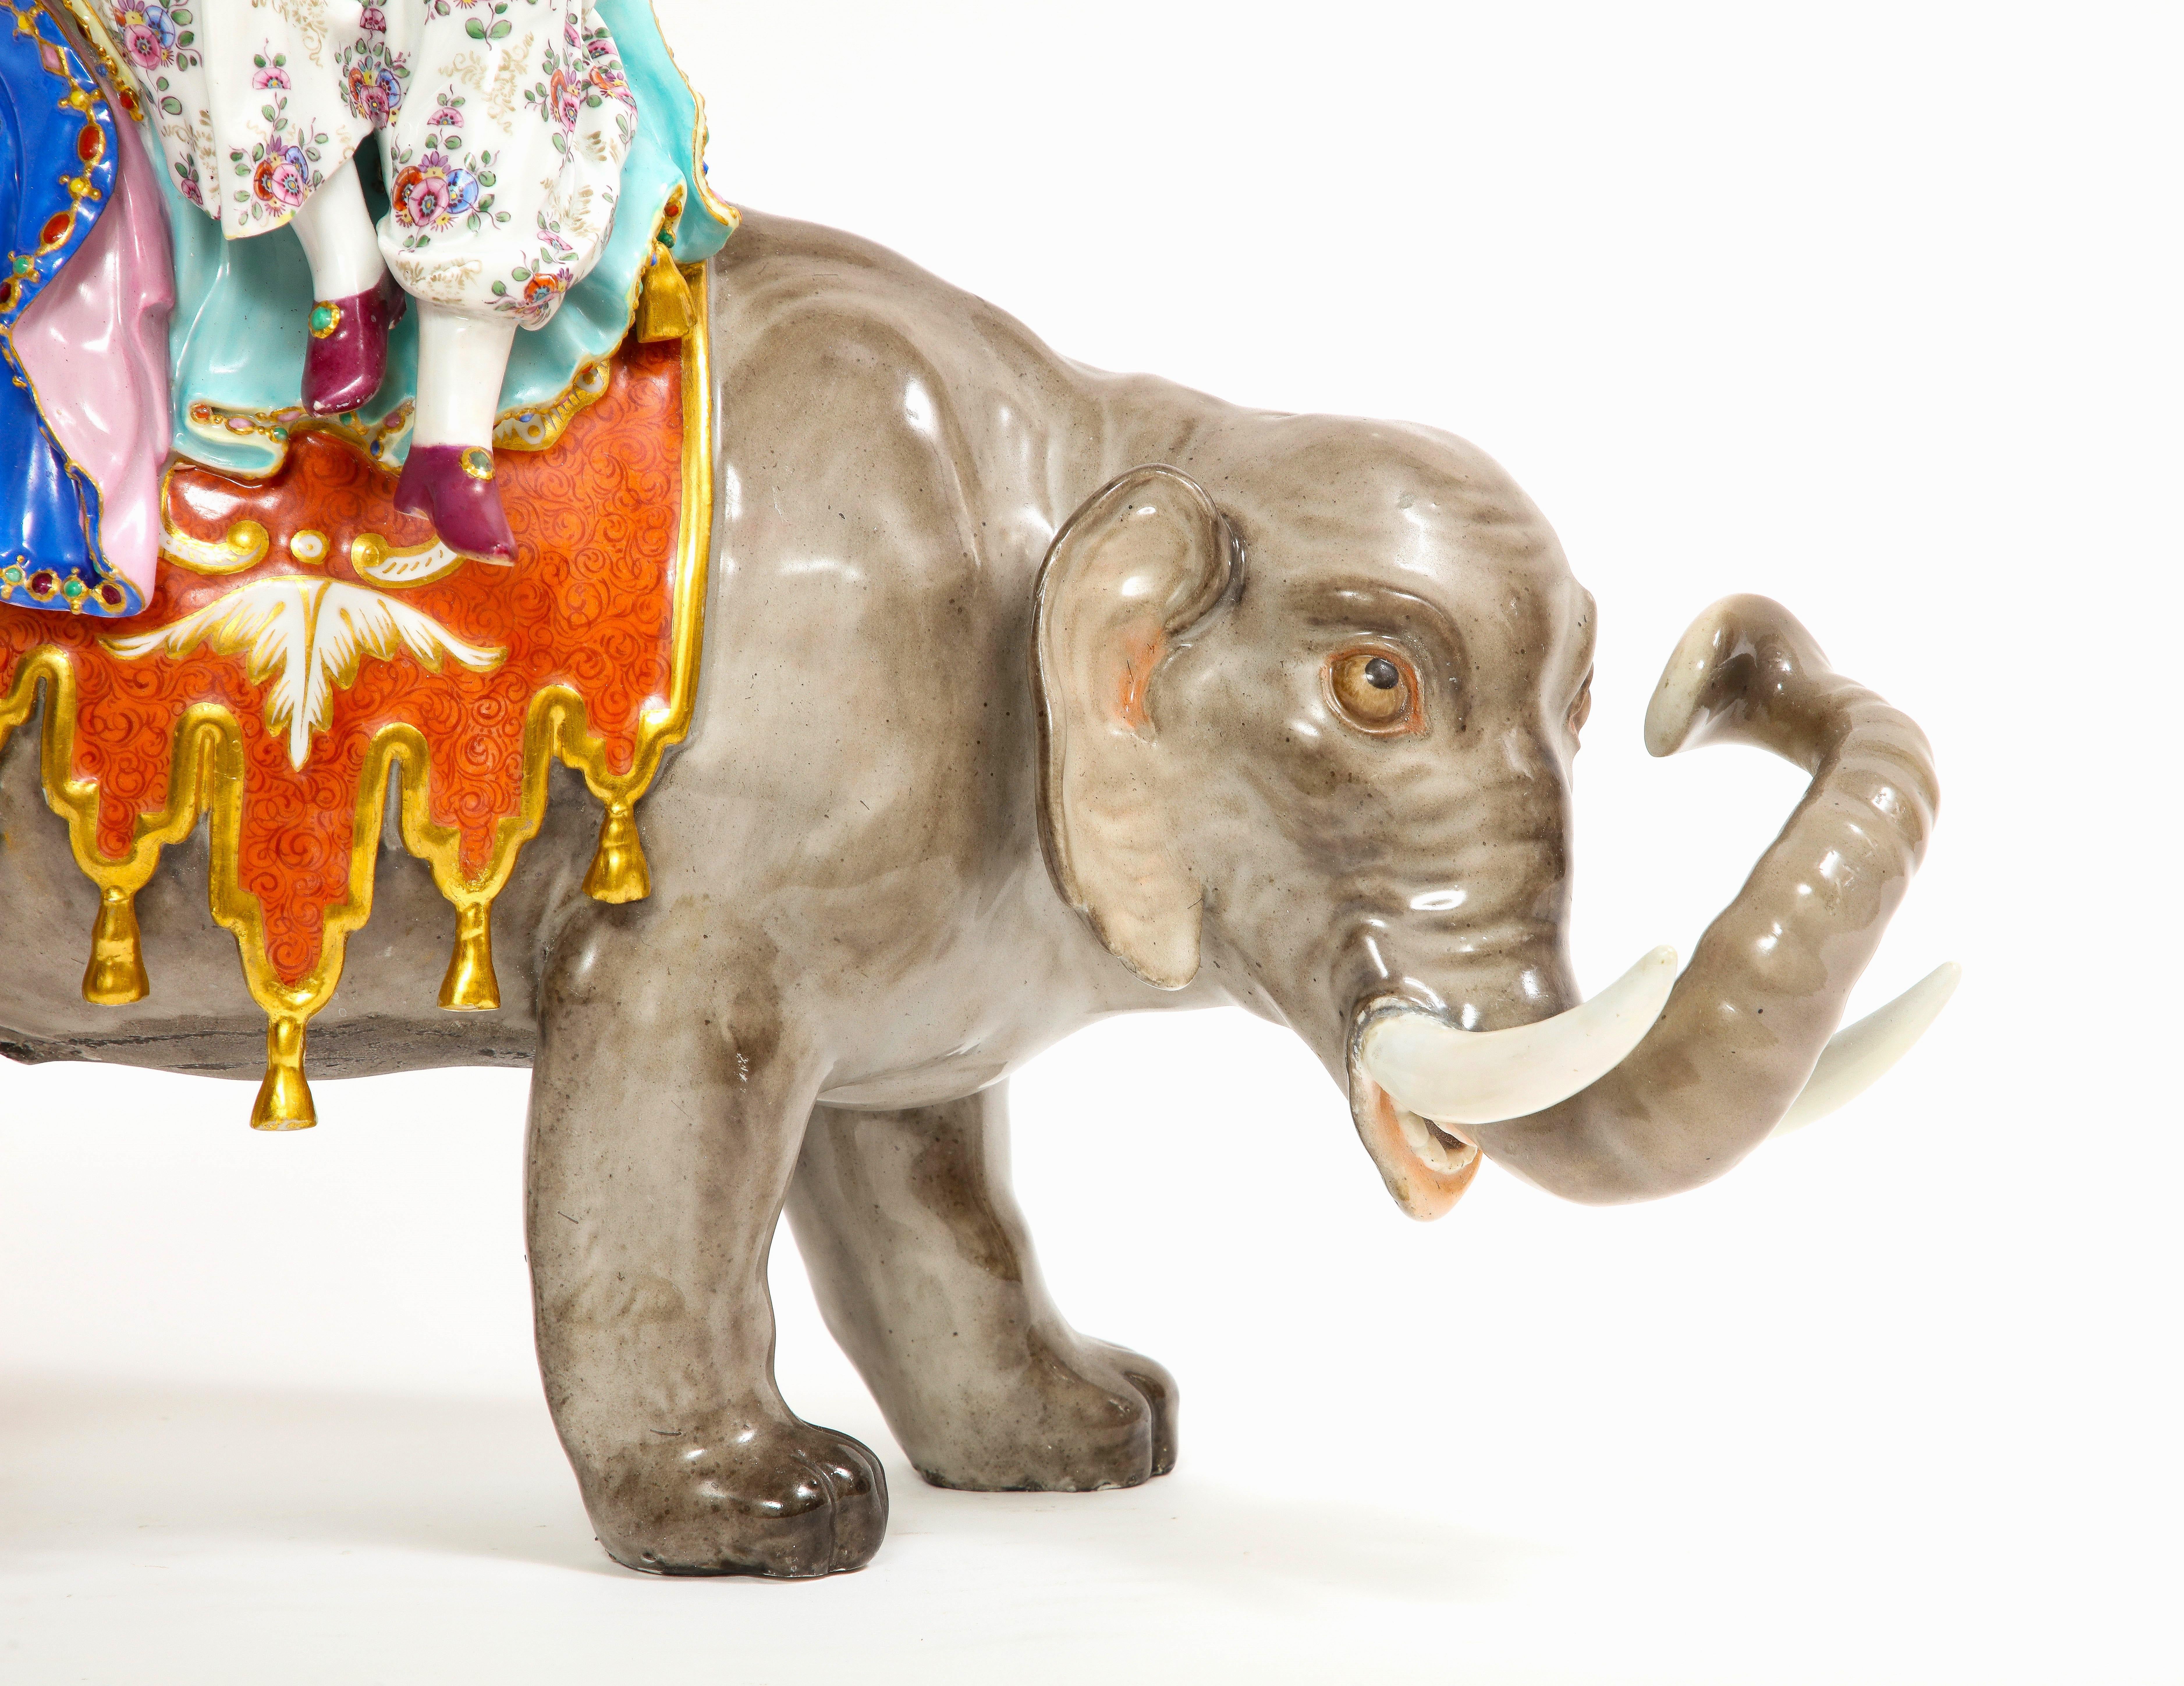 19th C. Meissen Porcelain Figure of a Sultana Riding an Elephant with a Crown For Sale 4